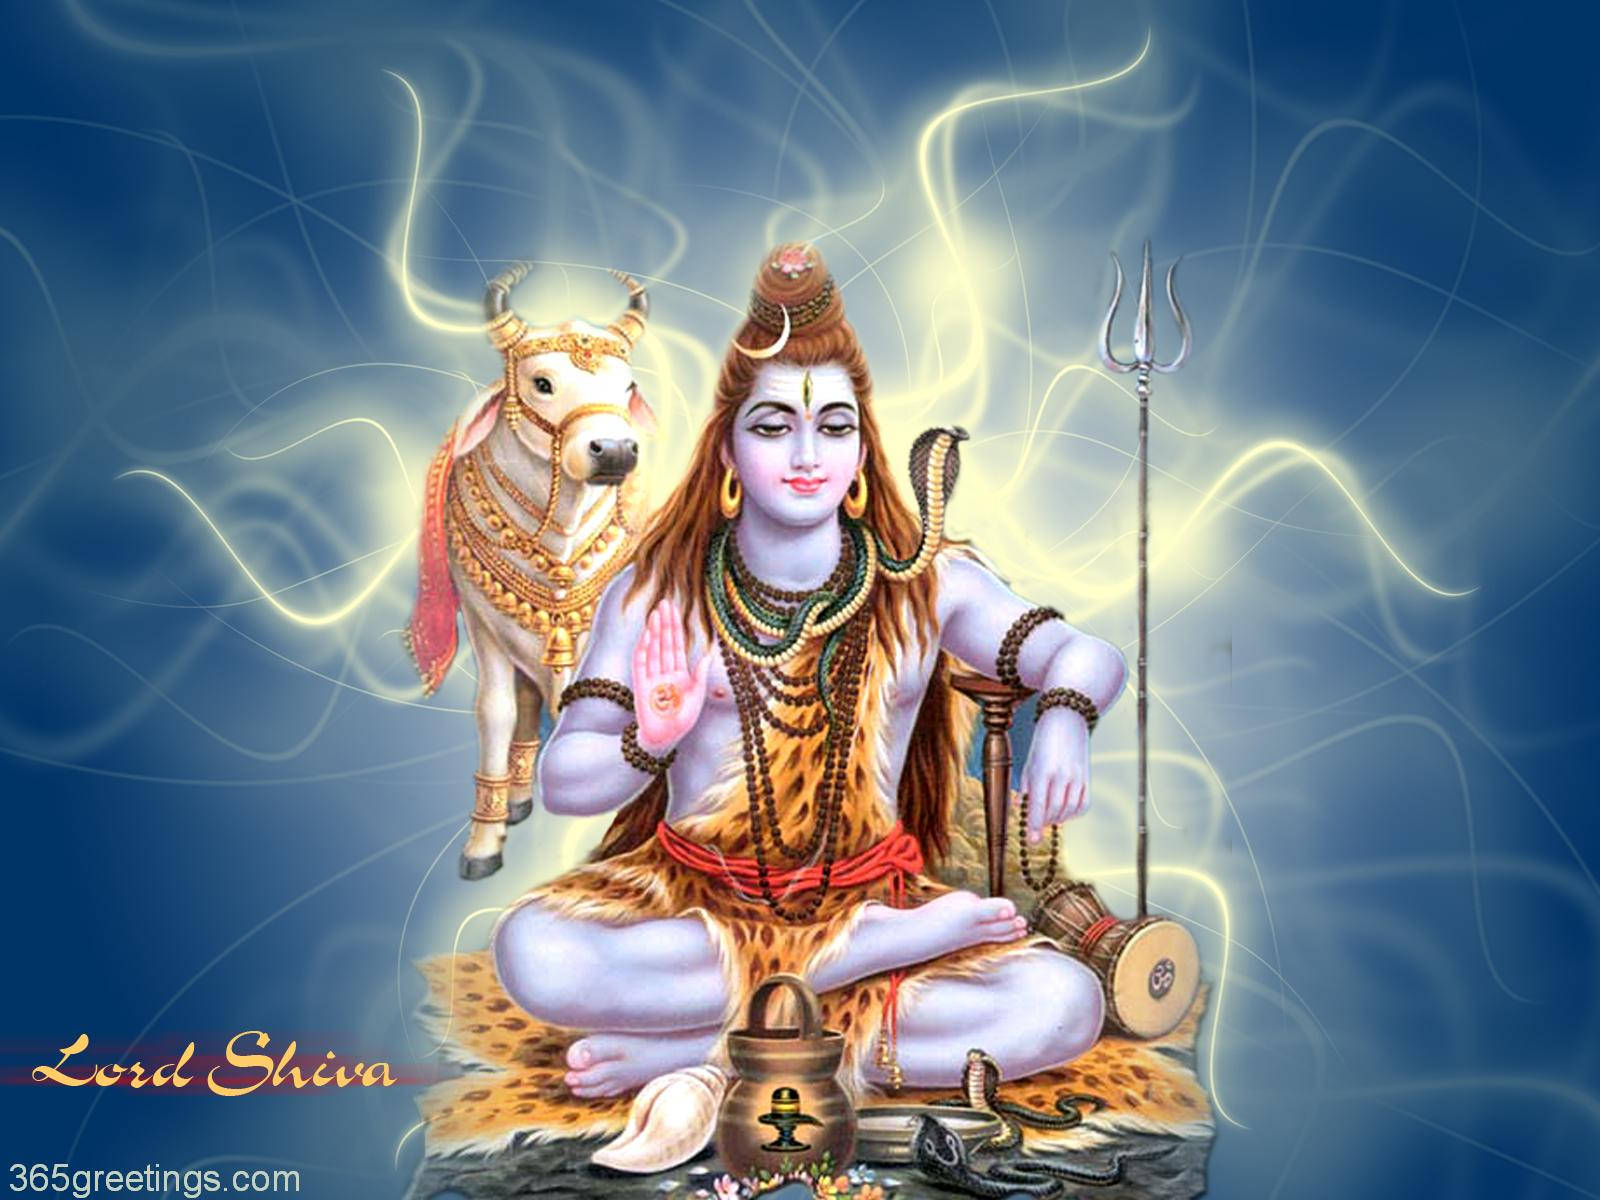 The Great Lord Shiva